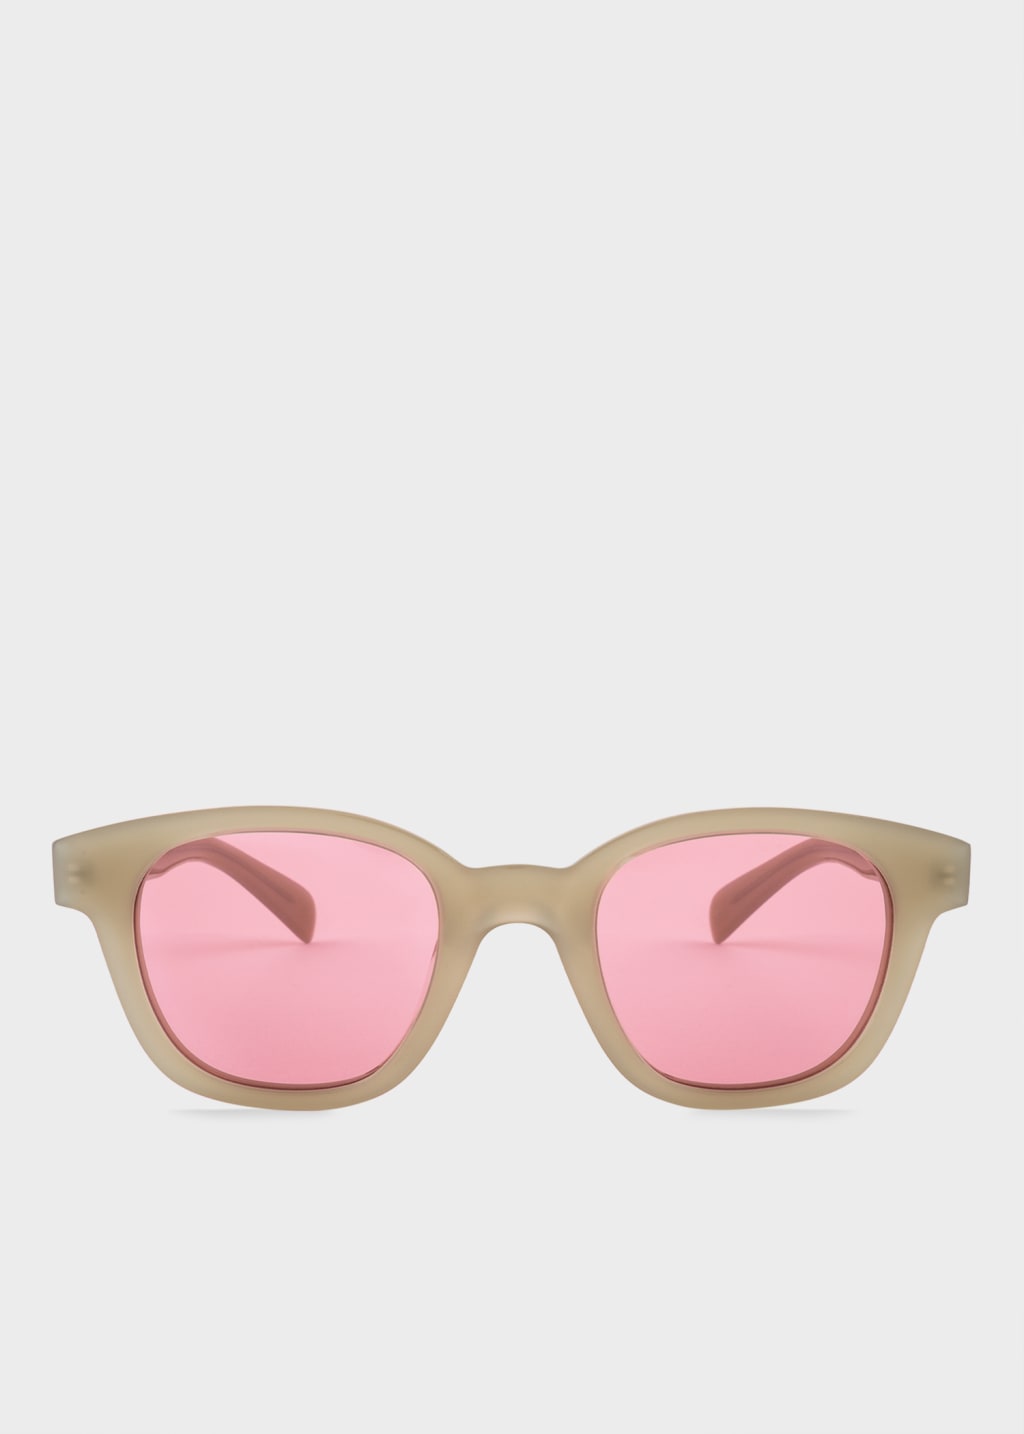 Product view - Opal Light Brown 'Glover' Sunglasses Paul Smith